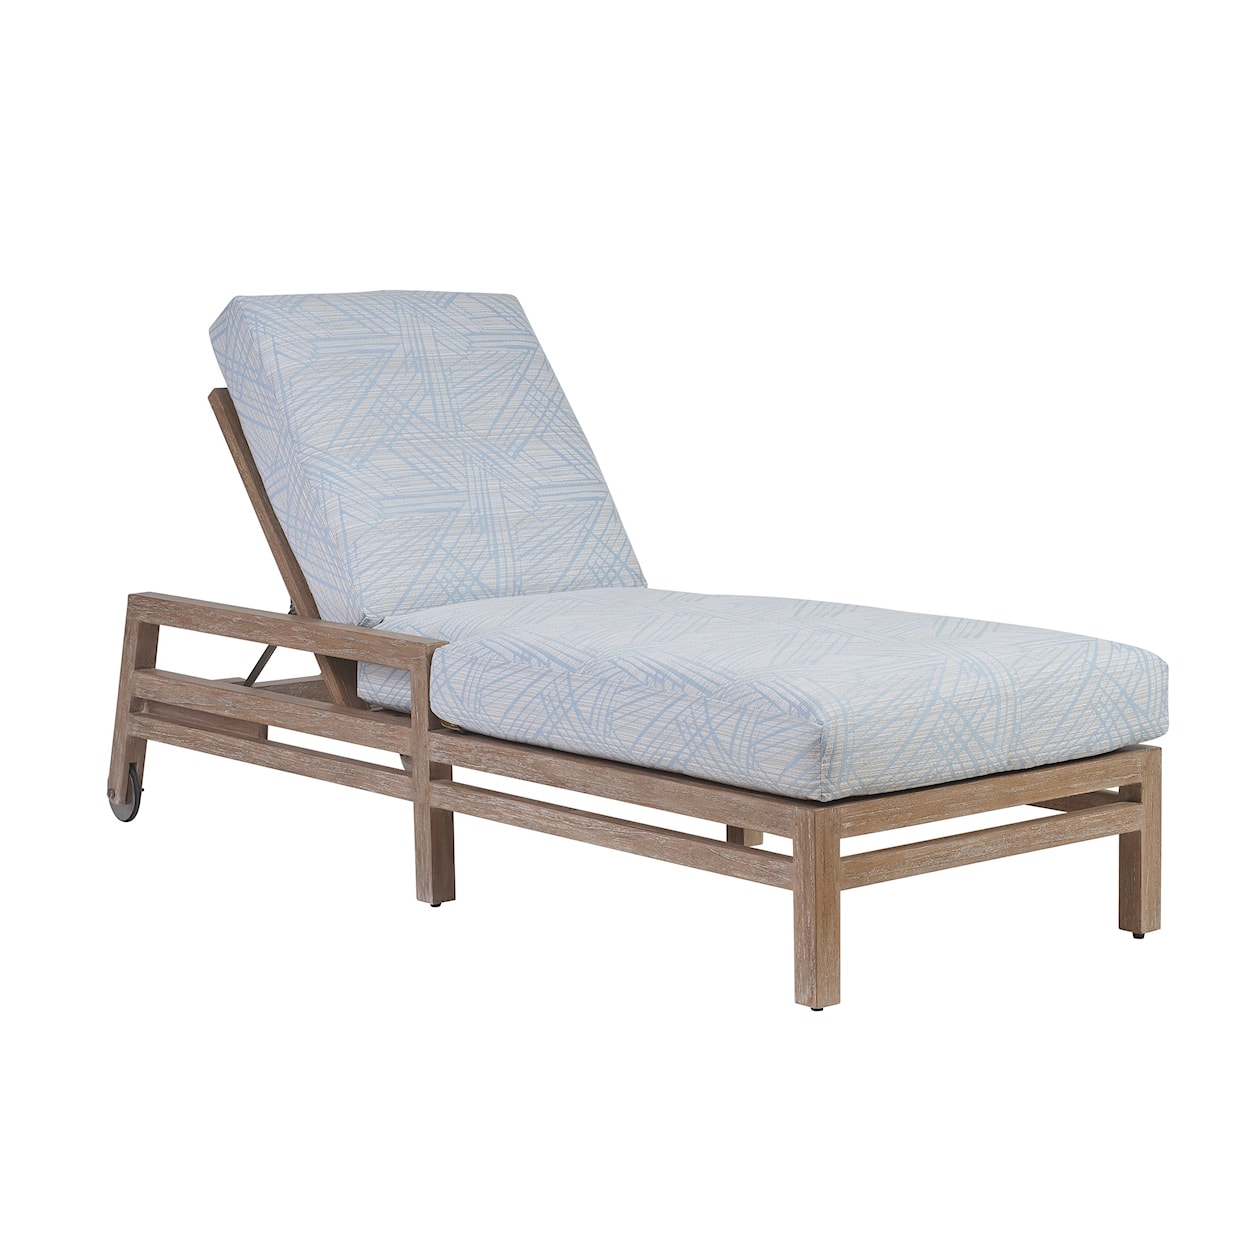 Tommy Bahama Outdoor Living Stillwater Cove Outdoor Chaise